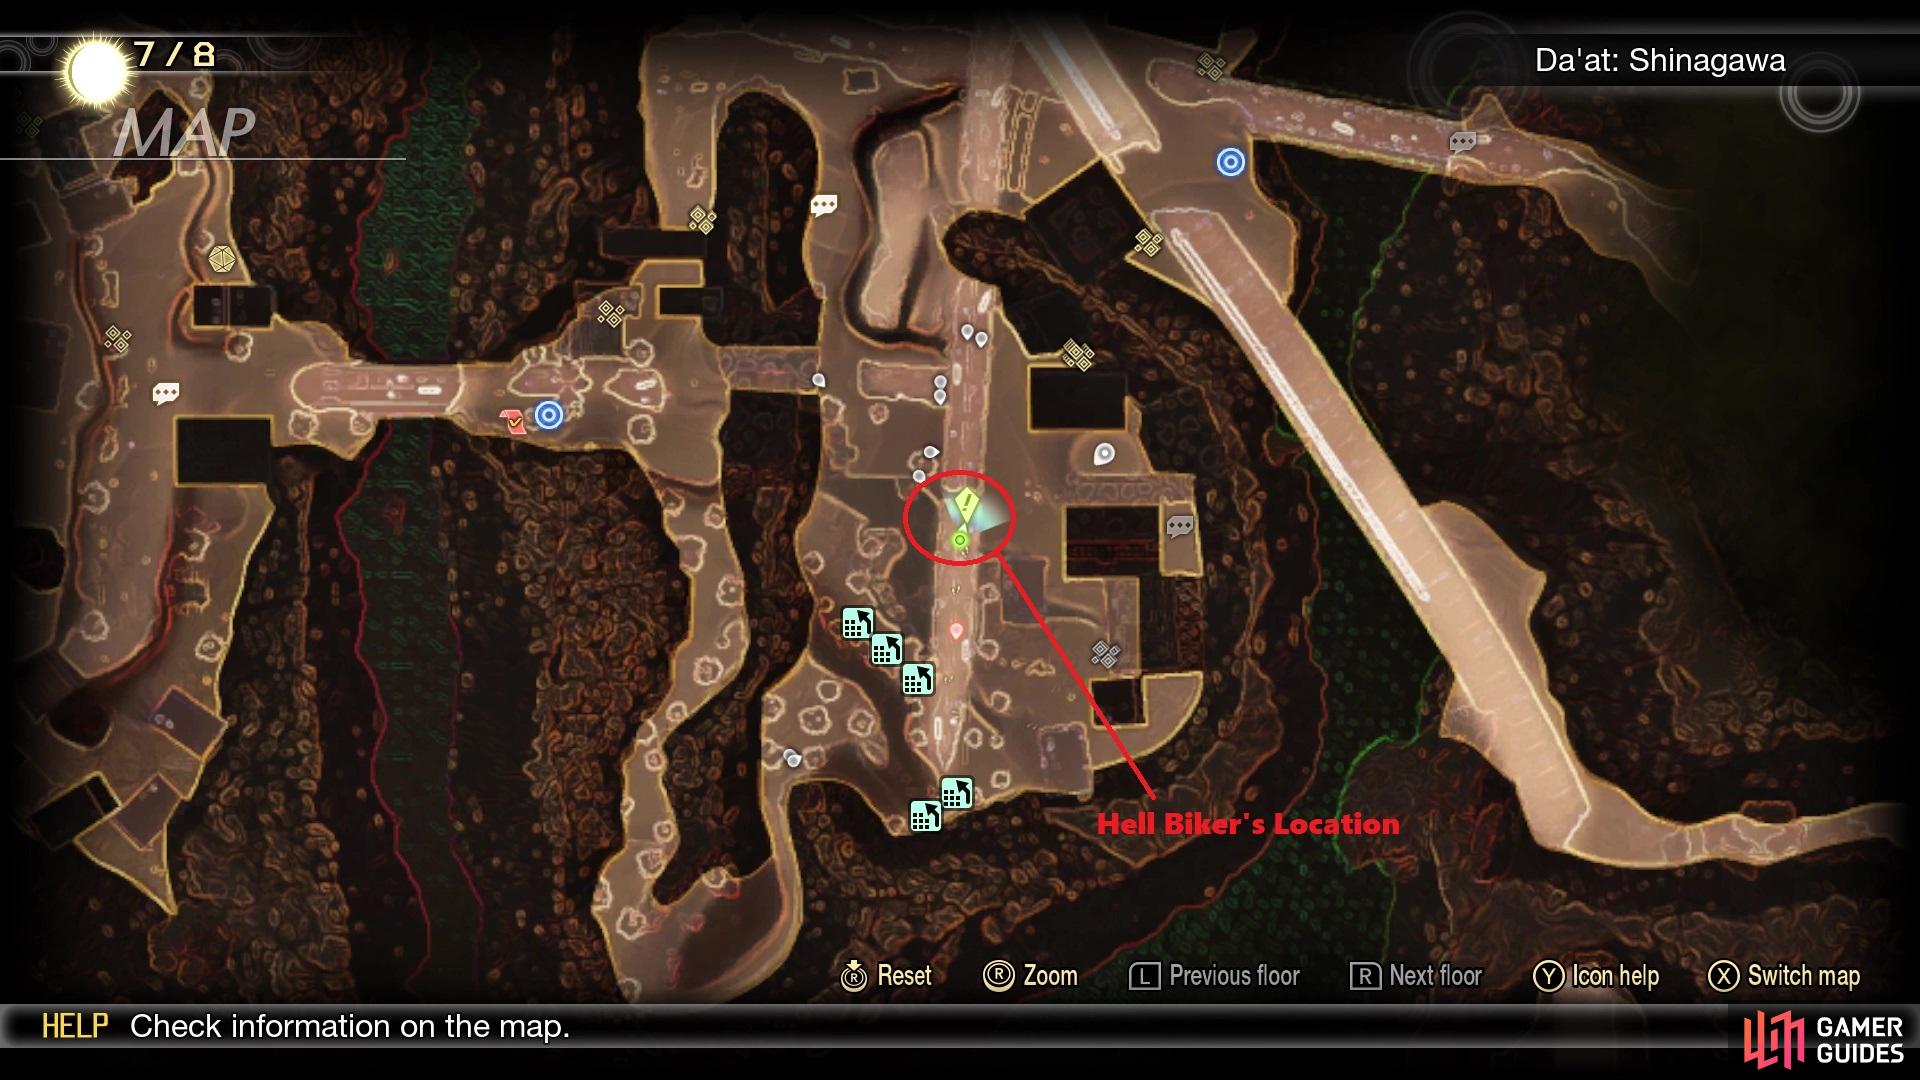 Hell Biker’s Location on the map